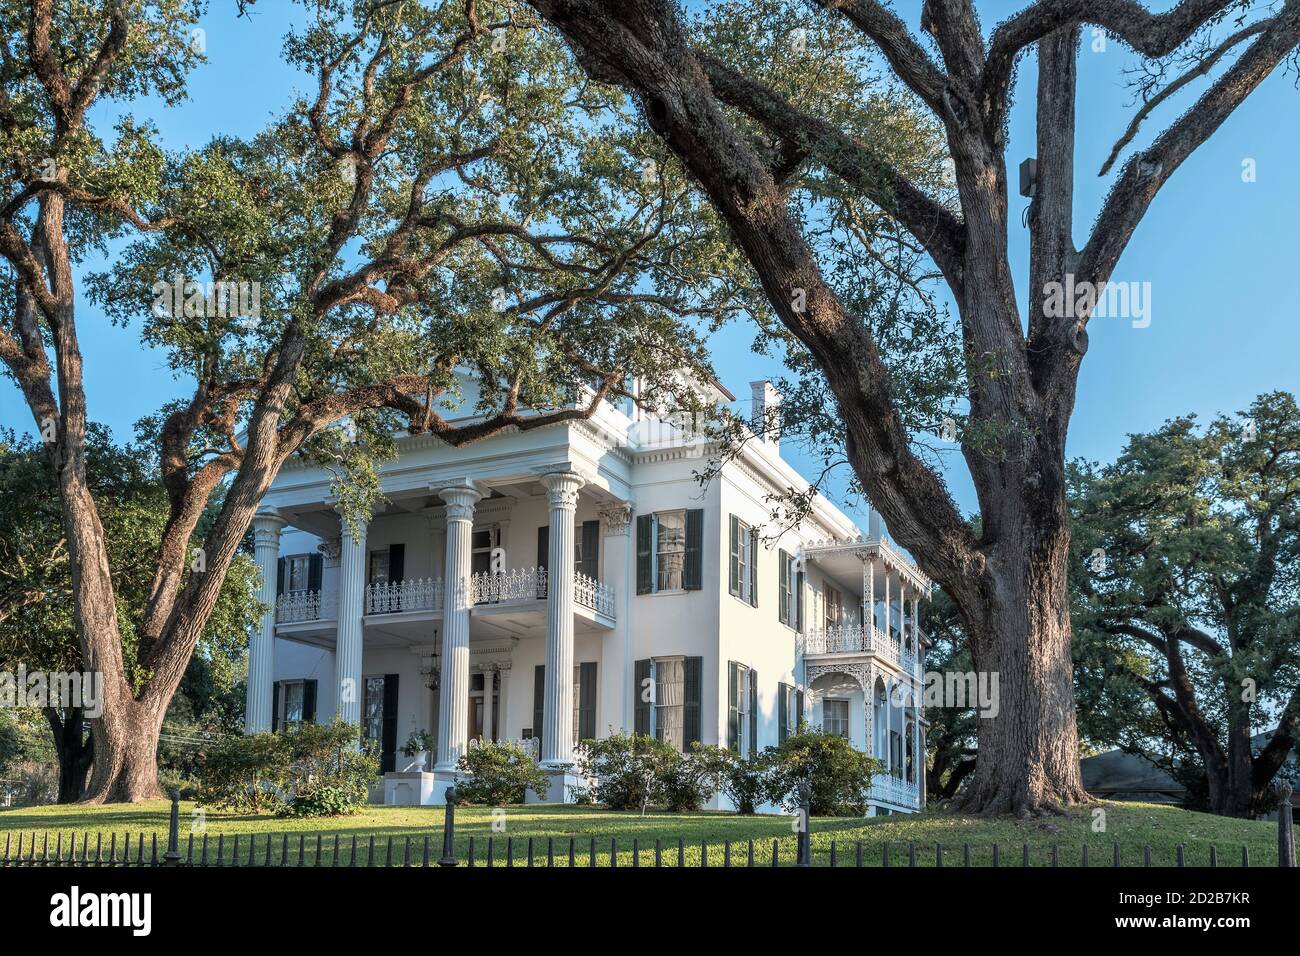 Natchez antebellum home, Stanton Hall built in 1857 by an Irish immigrant who became a wealthy planter and cotton merchant, Natchez, Mississippi, USA. Stock Photo